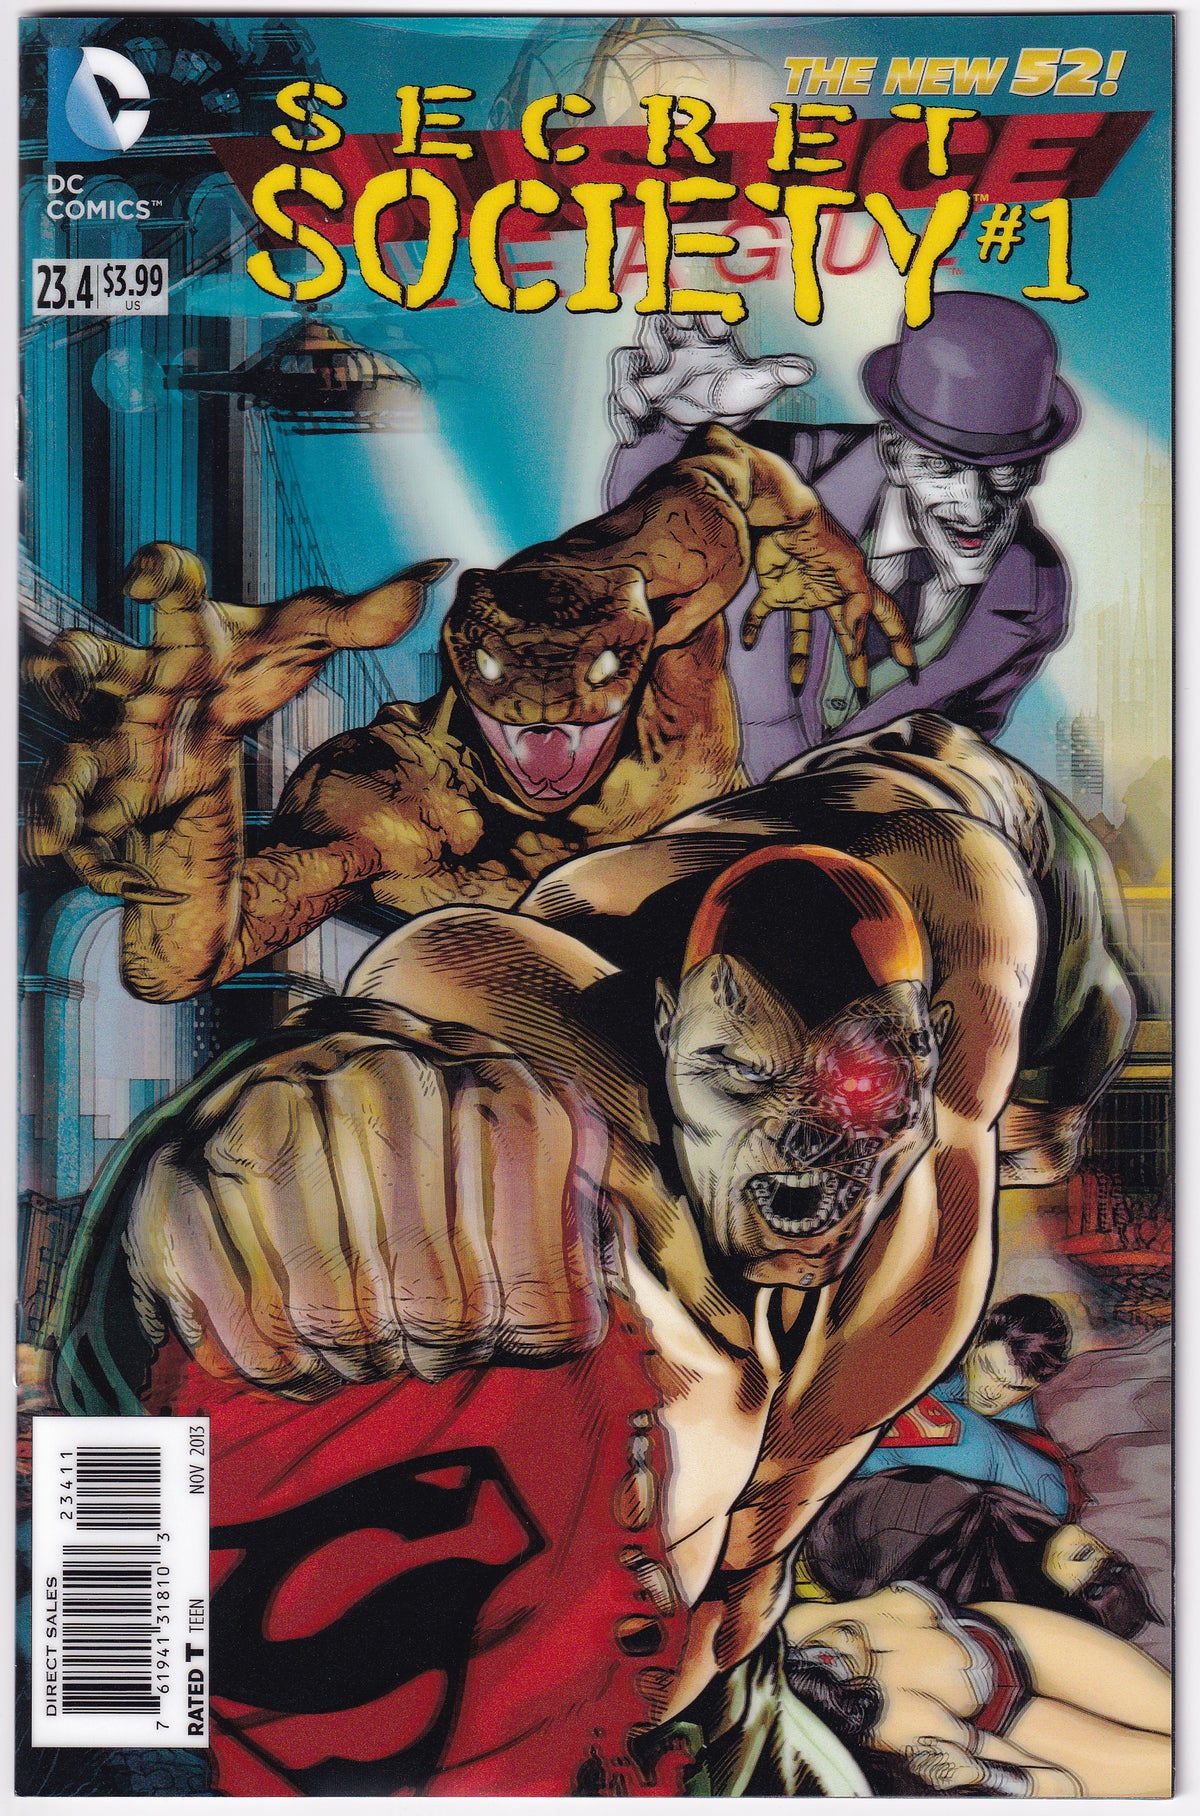 Photo of Justice League Vol. 1 (2013)  Issue 23.4A  Near Mint Comic sold by Stronghold Collectibles